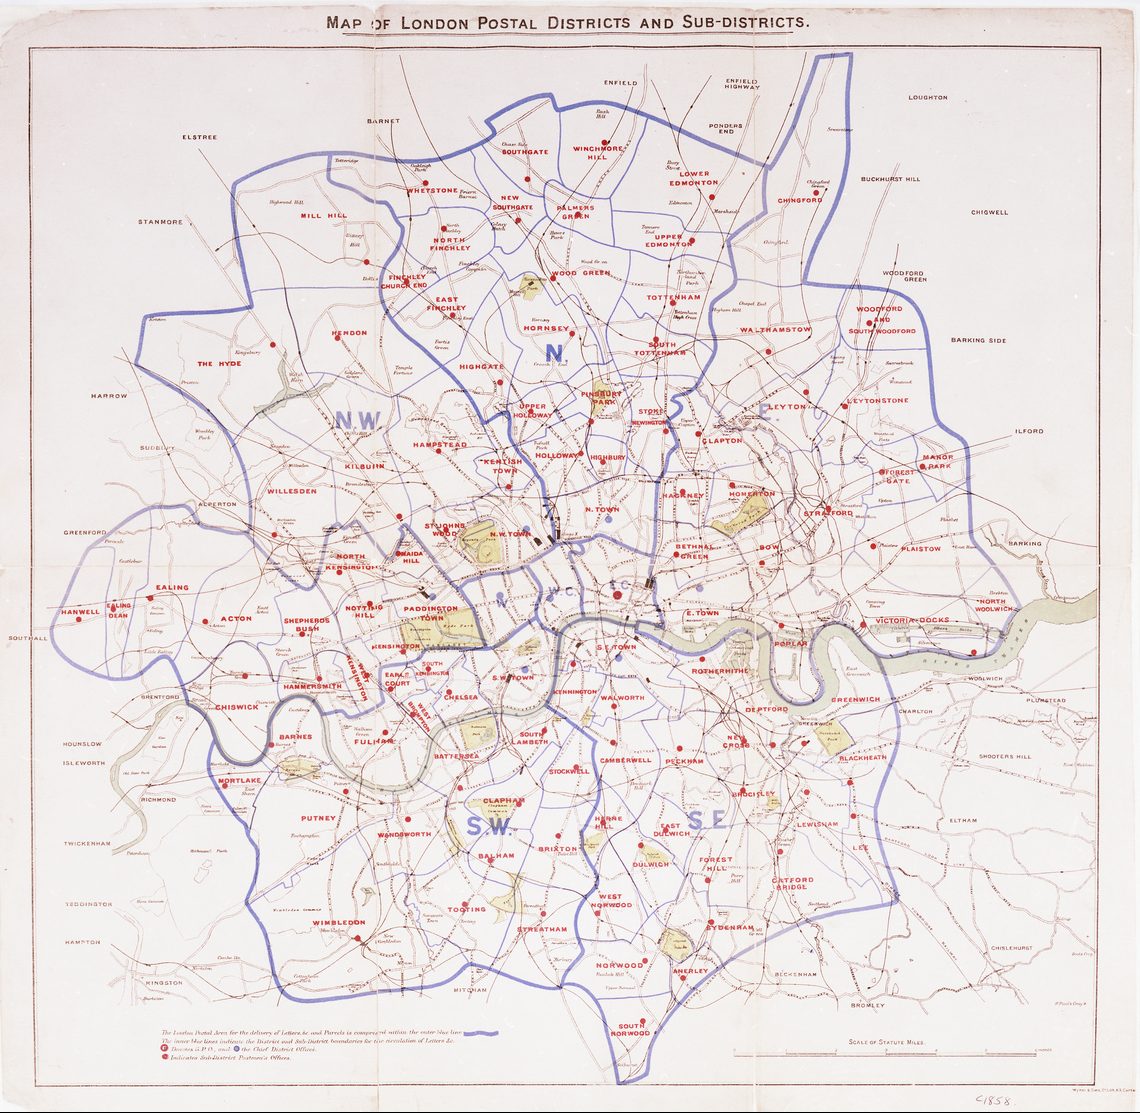 Early map of central London districts and sub districts by postcode.